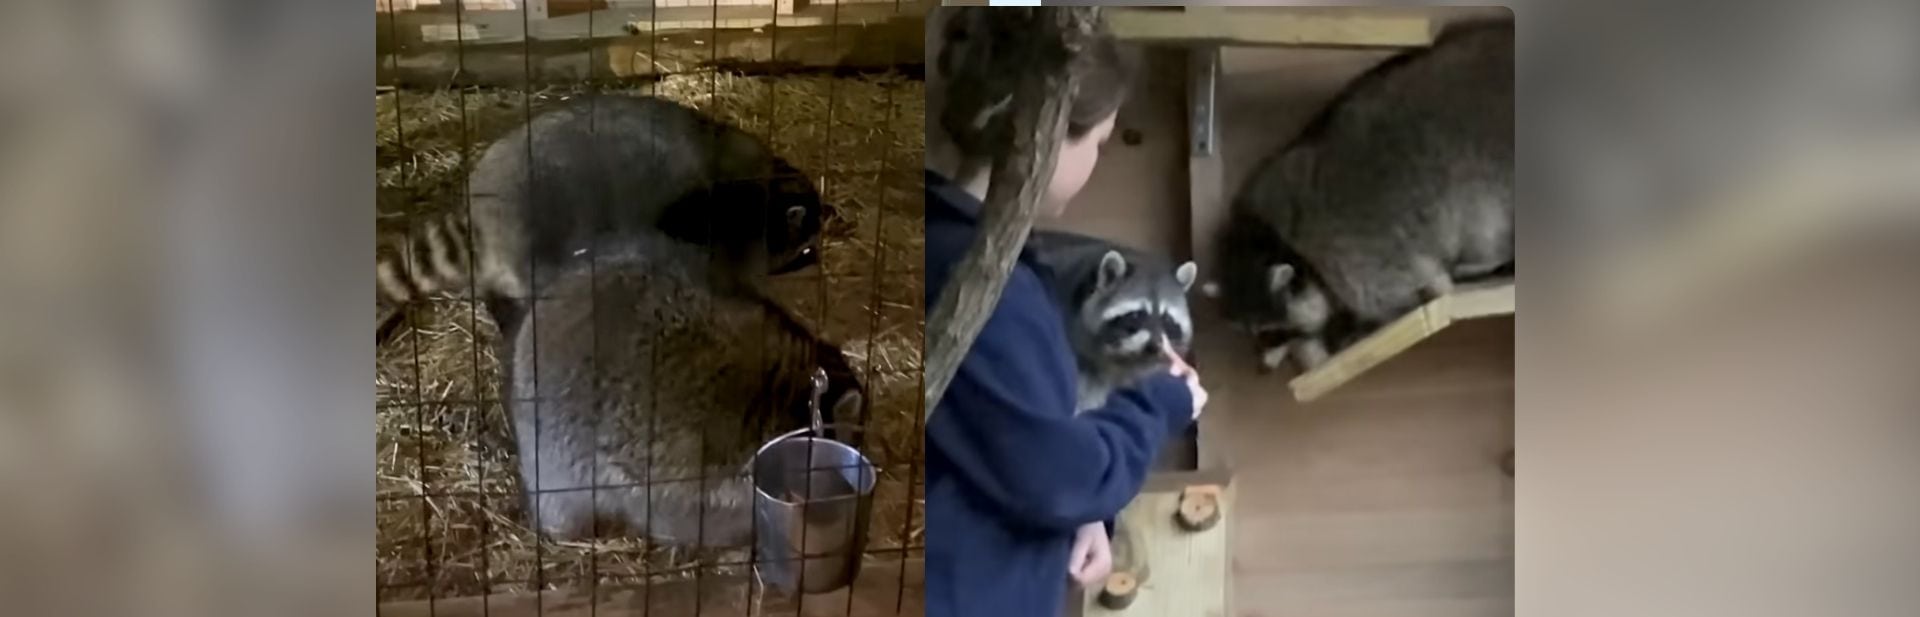 Chunky as Cubs Raccoons Now on Playful Path to Slimming Down